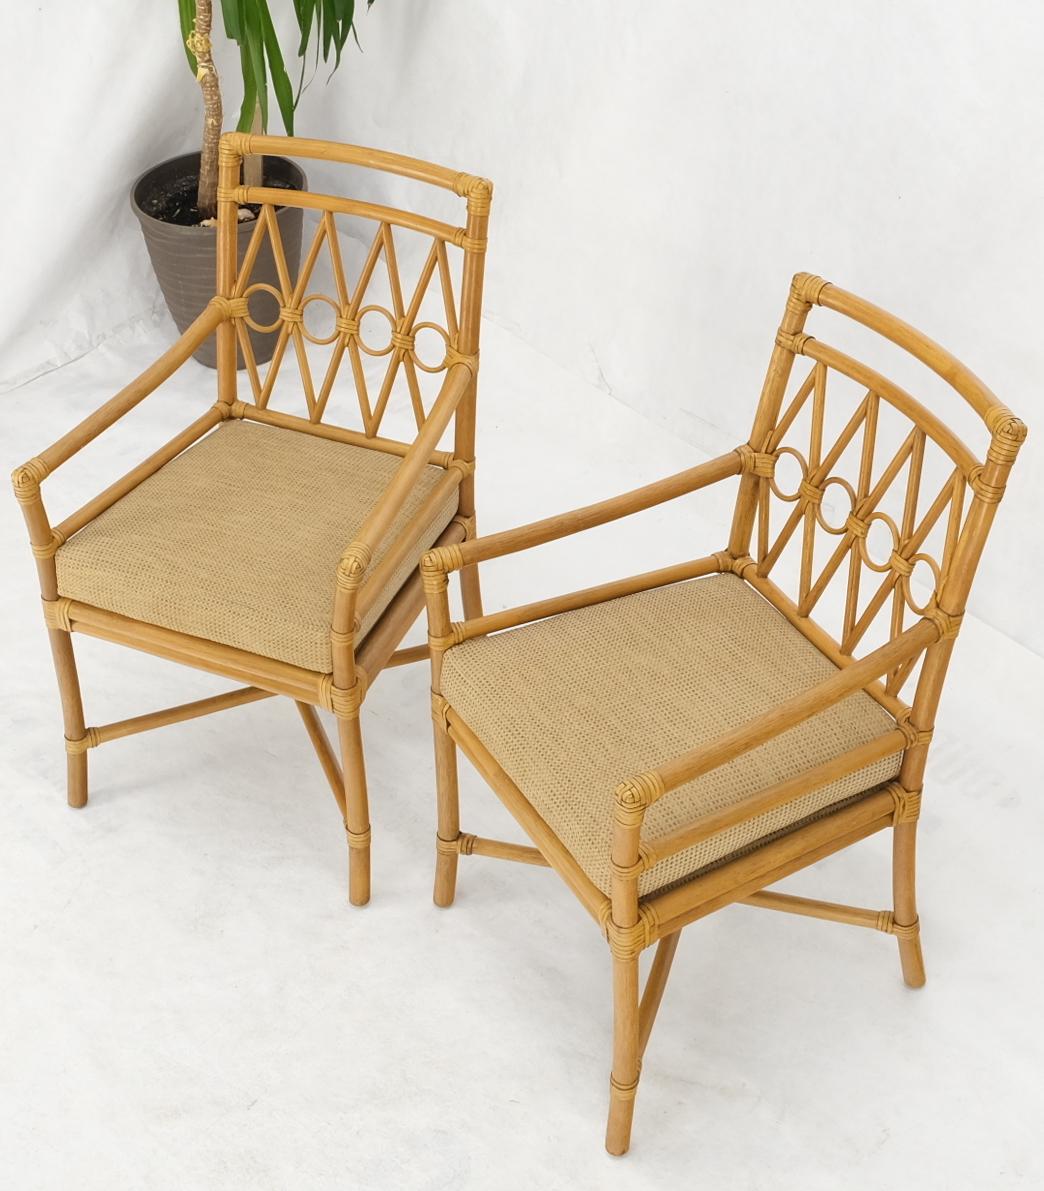 20th Century Pair Ficks Reed Blonde Rattan Leather Straps Design Armchairs Side Chairs 1970's